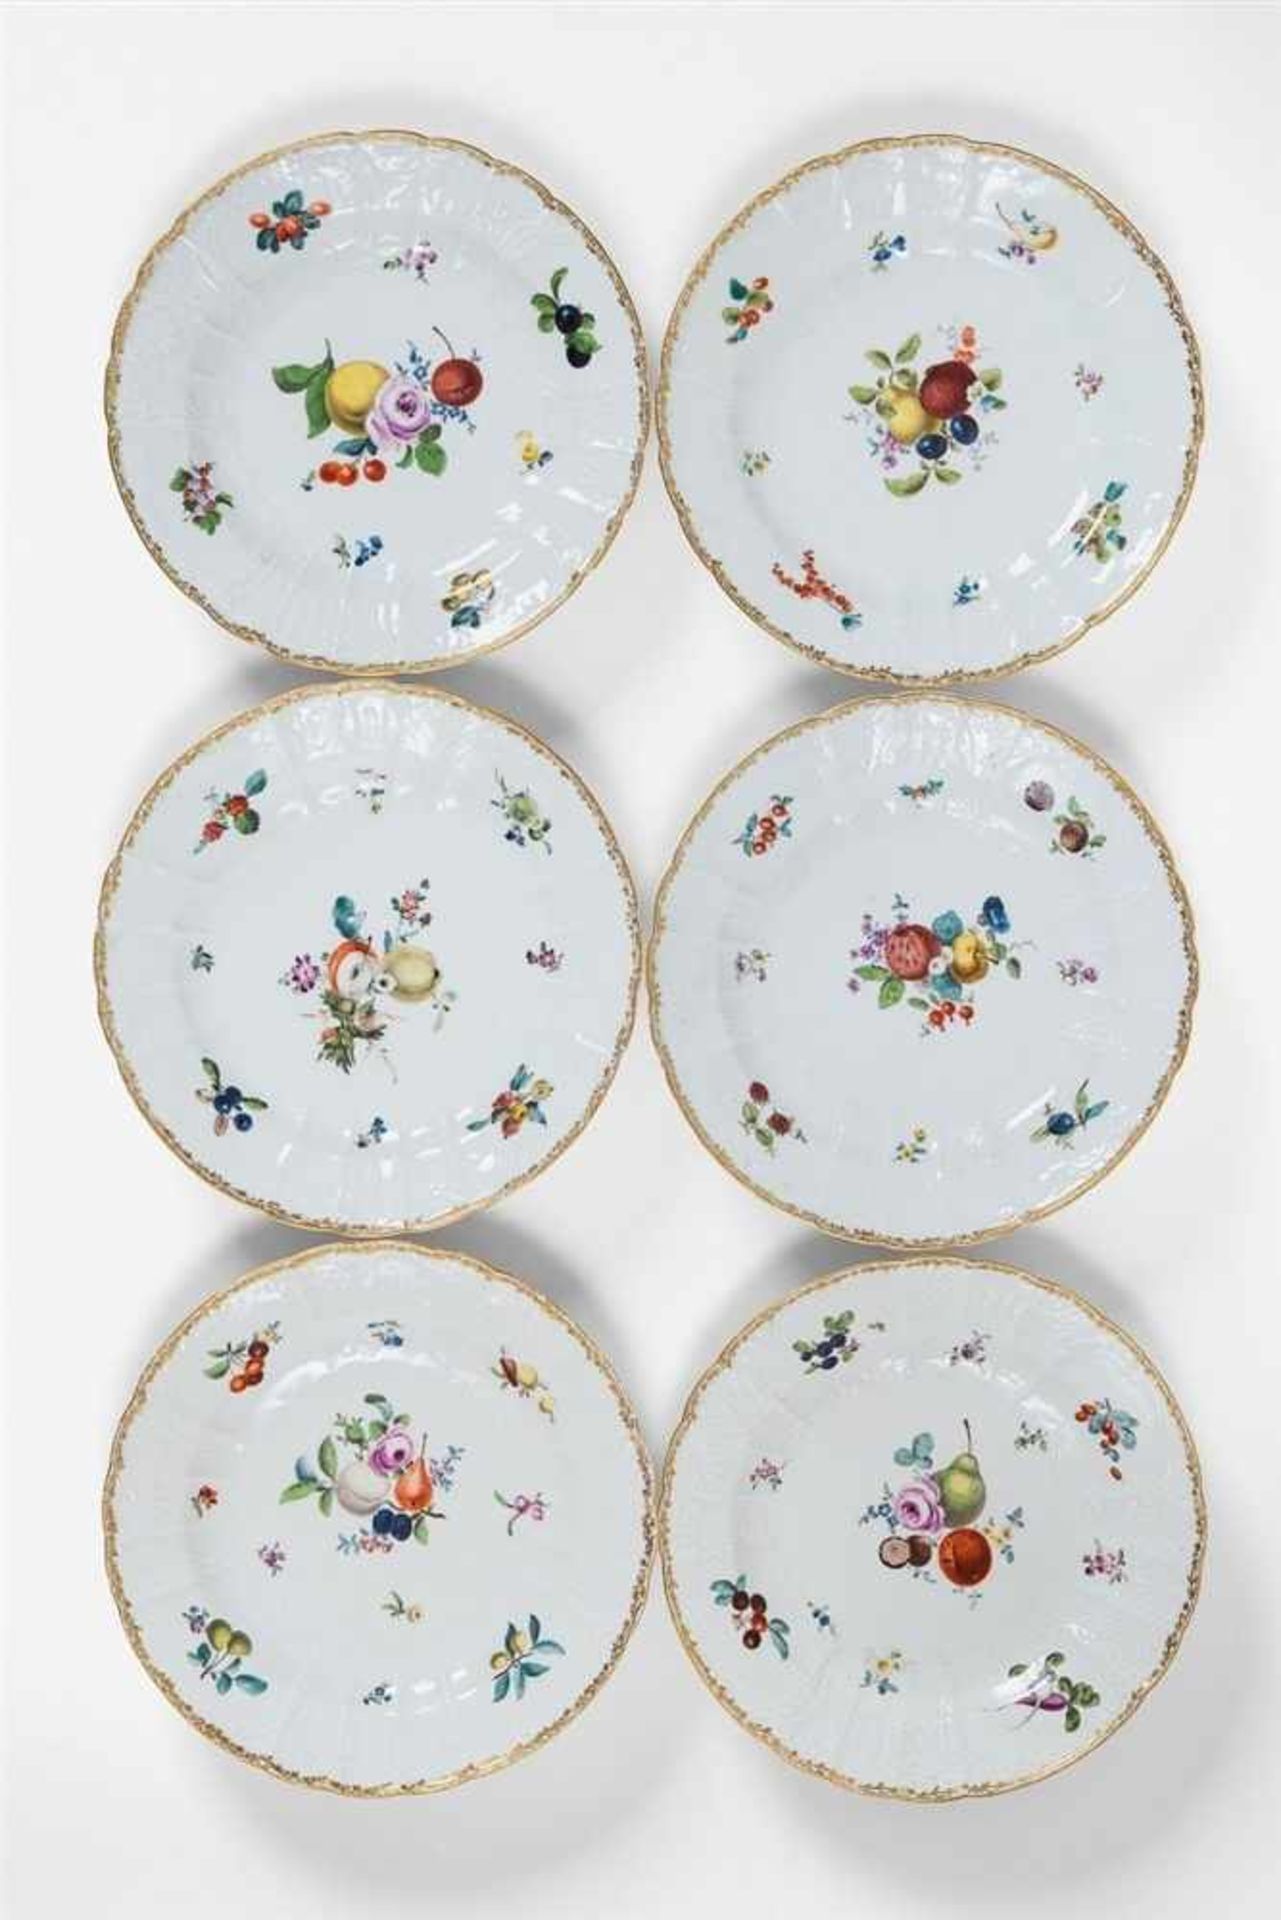 Six Meissen porcelain dinner plates from a dinner service made for Frederick II With Dulong